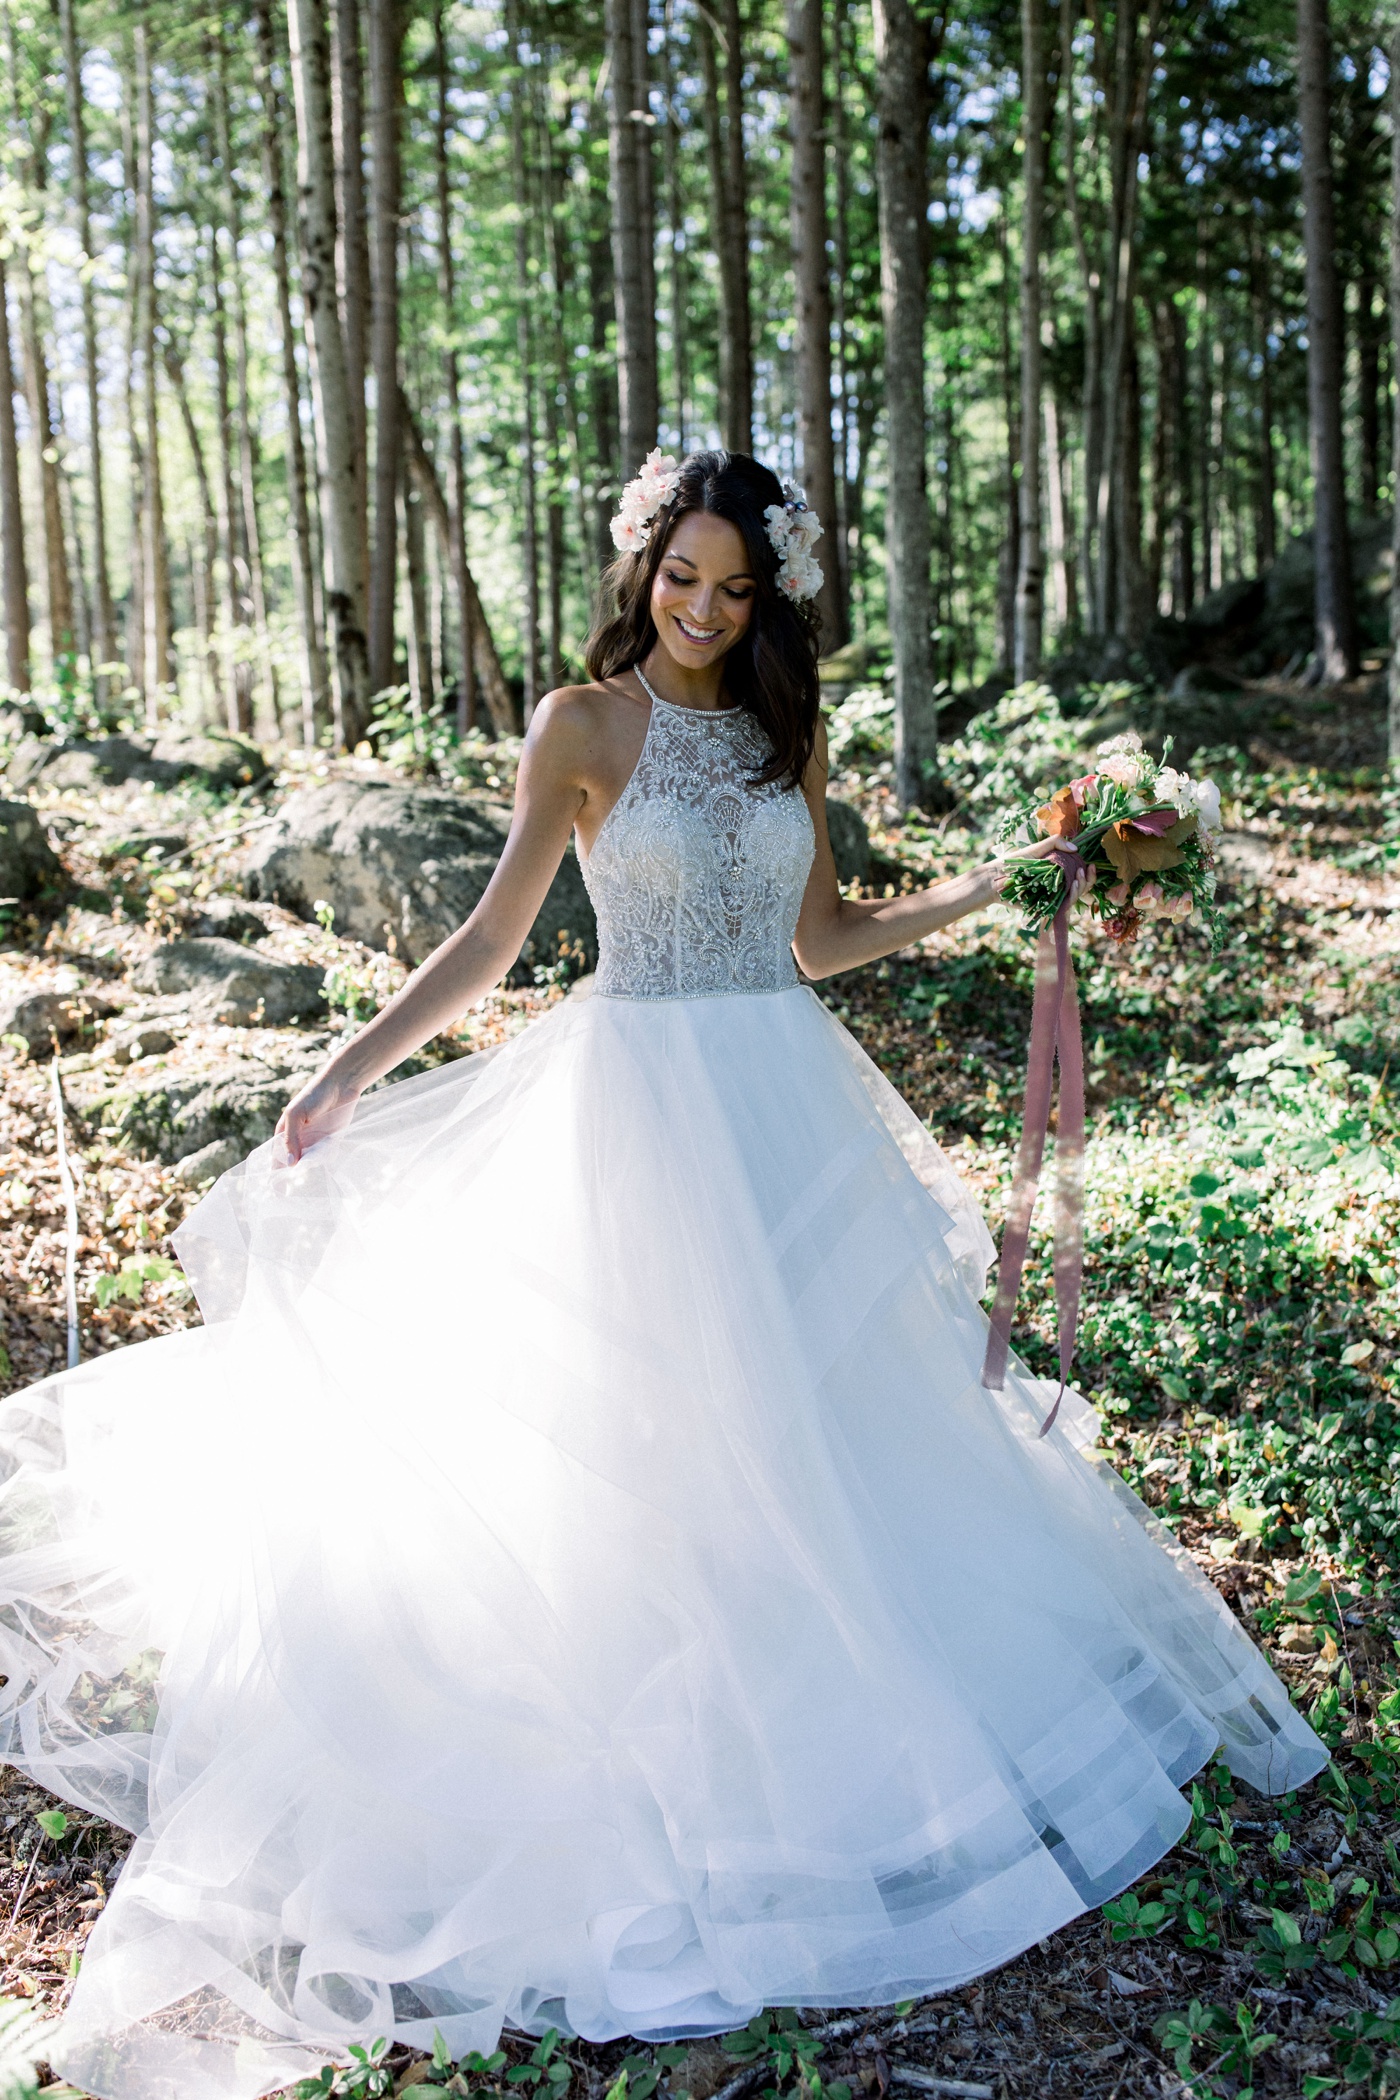 Styled shoot photography by Kate Preftakes